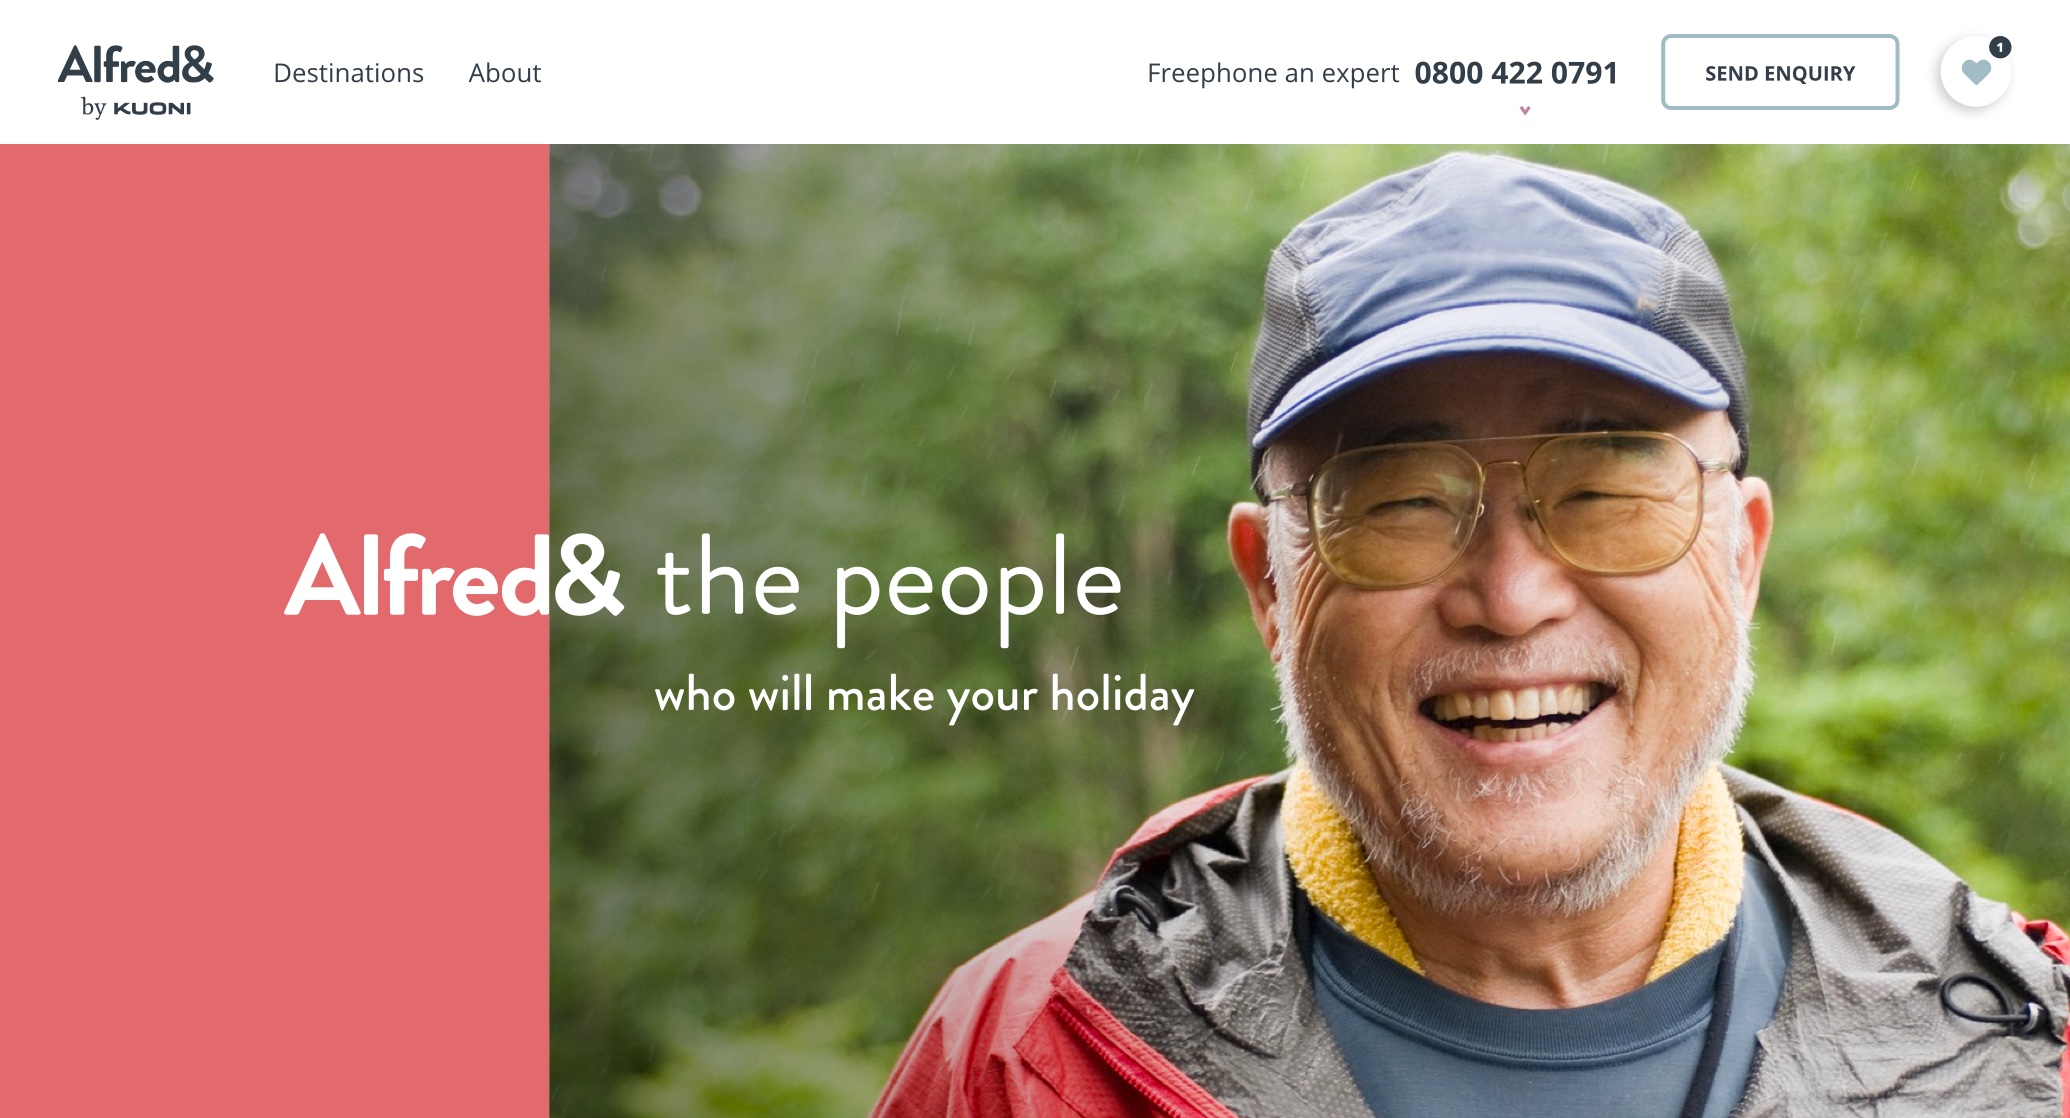 Alfred& homepage on website with a photo of a man smiling